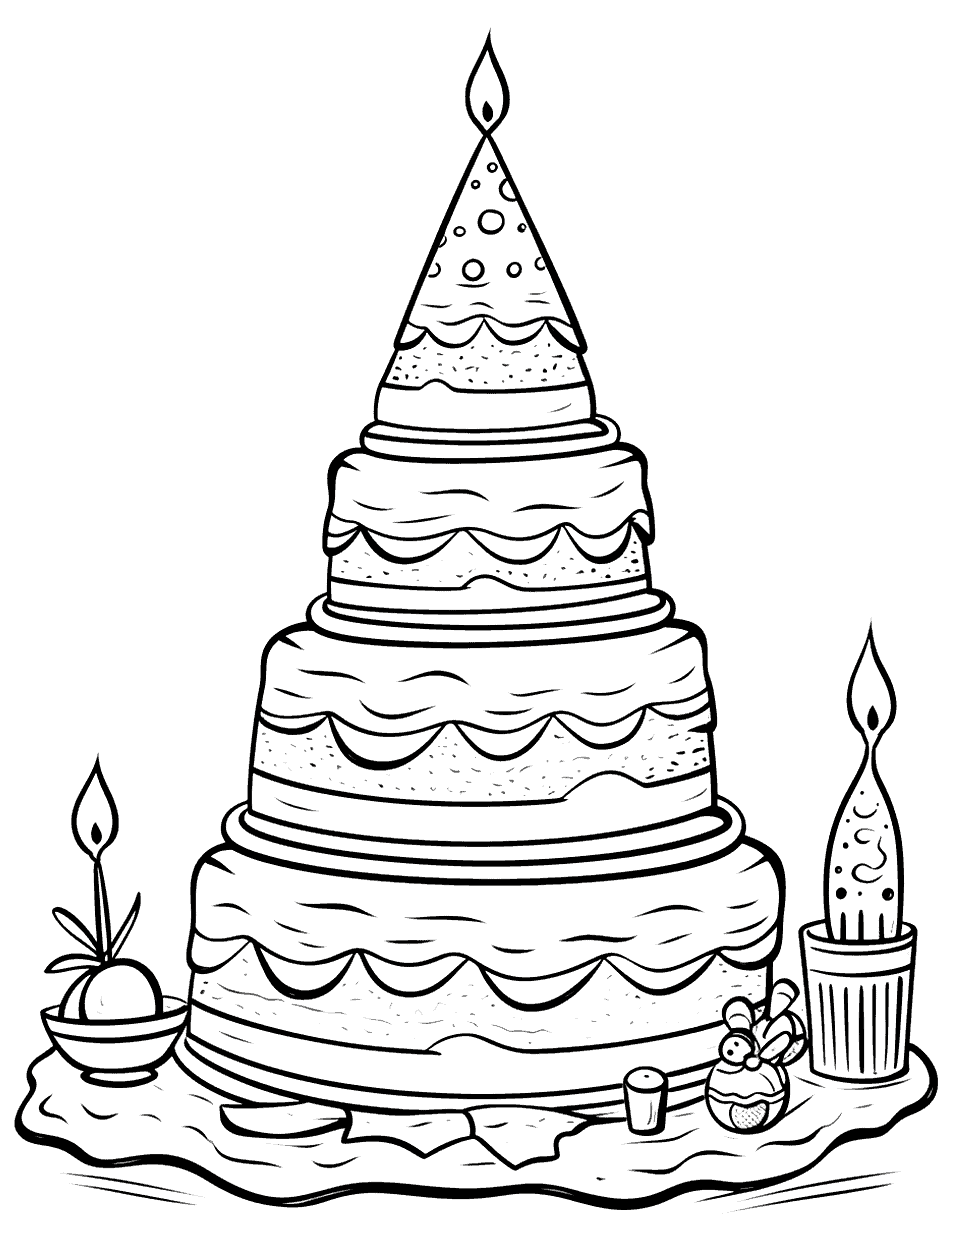 Ancient Egyptian Cake Coloring Page - A cake shape inspired by an Egyptian pyramid.